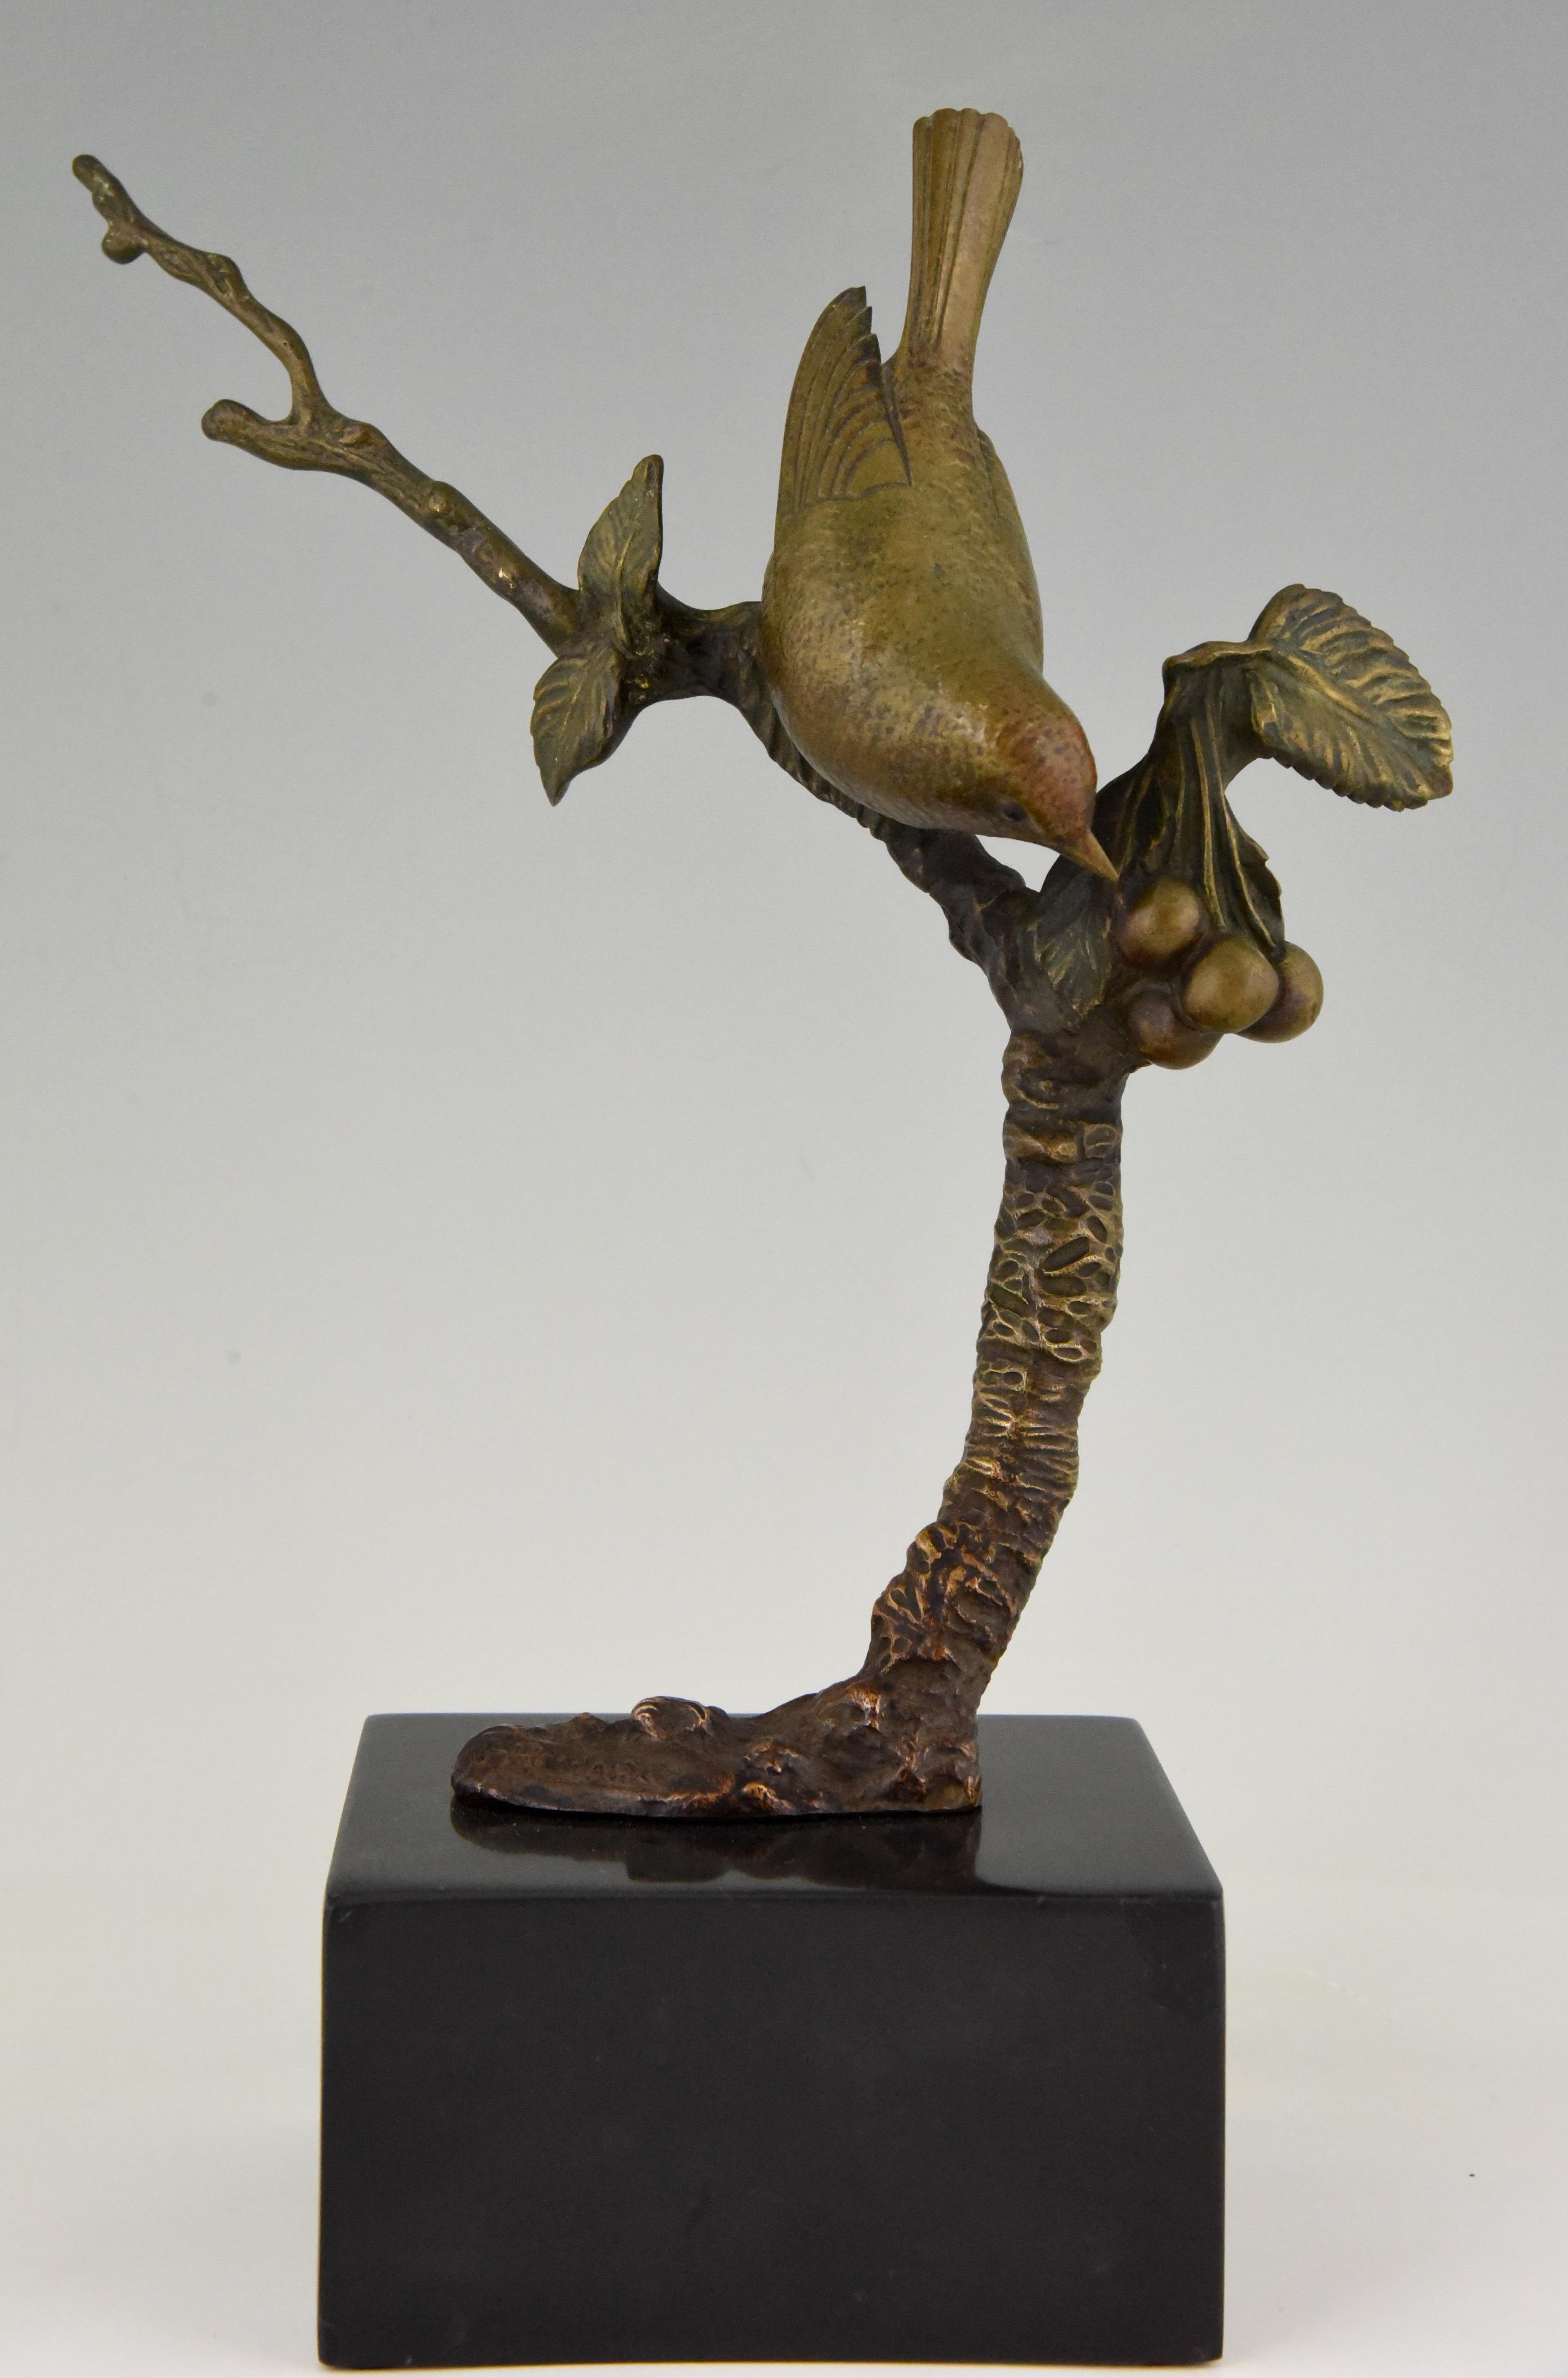 Cute Art Deco bronze sculpture of a bird on a branch with berries. Signed by the French artist Irenee Rochard, circa 1930. The bronze stands on a Belgian black marble base and has a lovely patina.